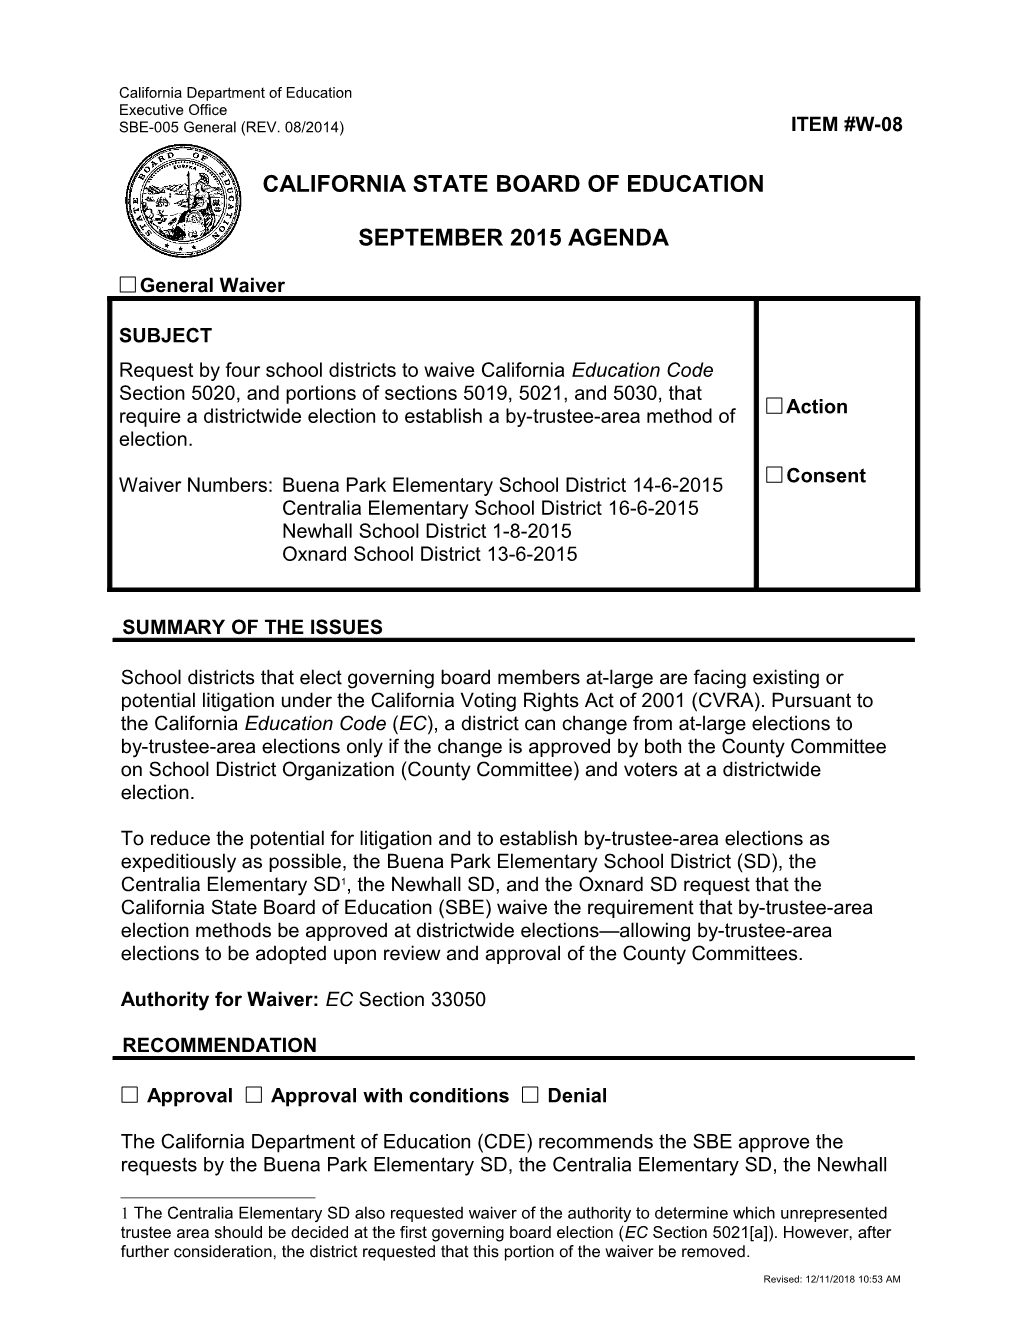 September 2015 Waiver Item W-08 Rev - Meeting Agendas (CA State Board of Education)